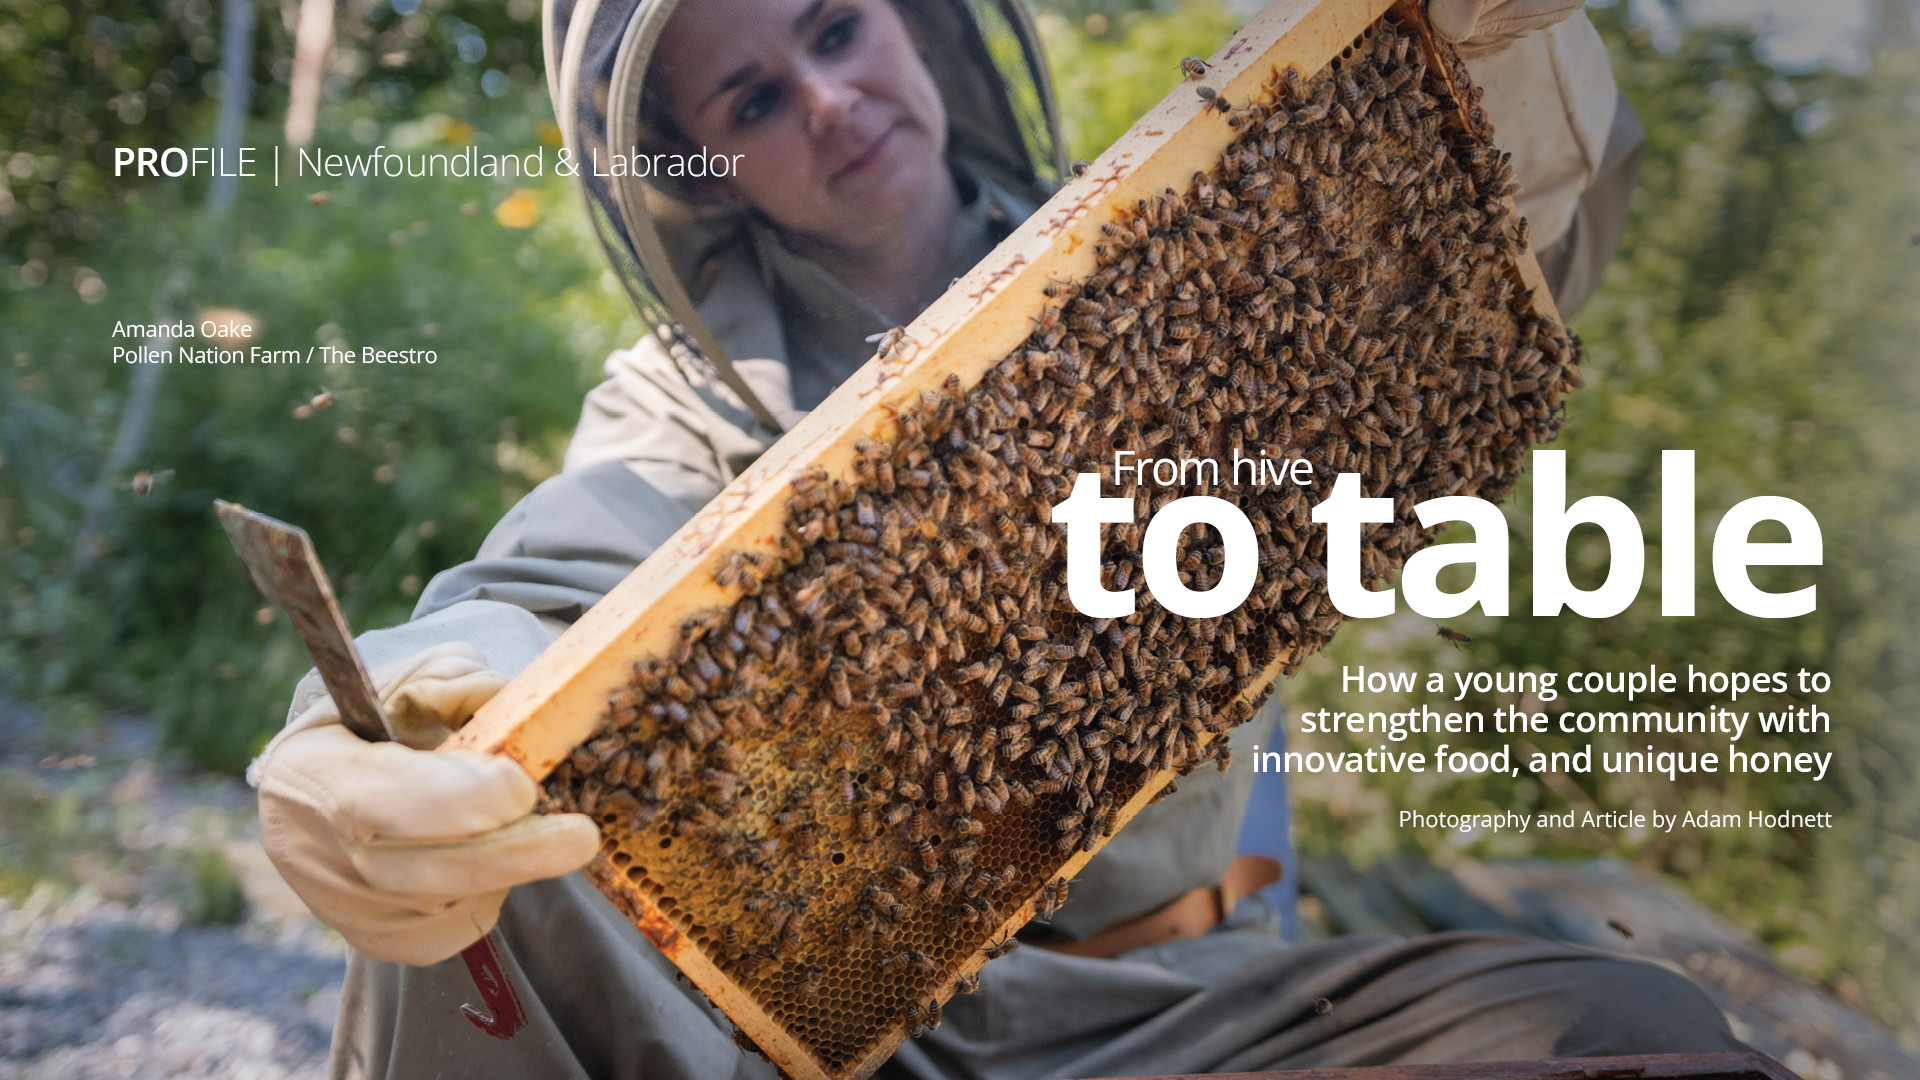 How a young couple hopes to strengthen the community with innovative food, and unique honey